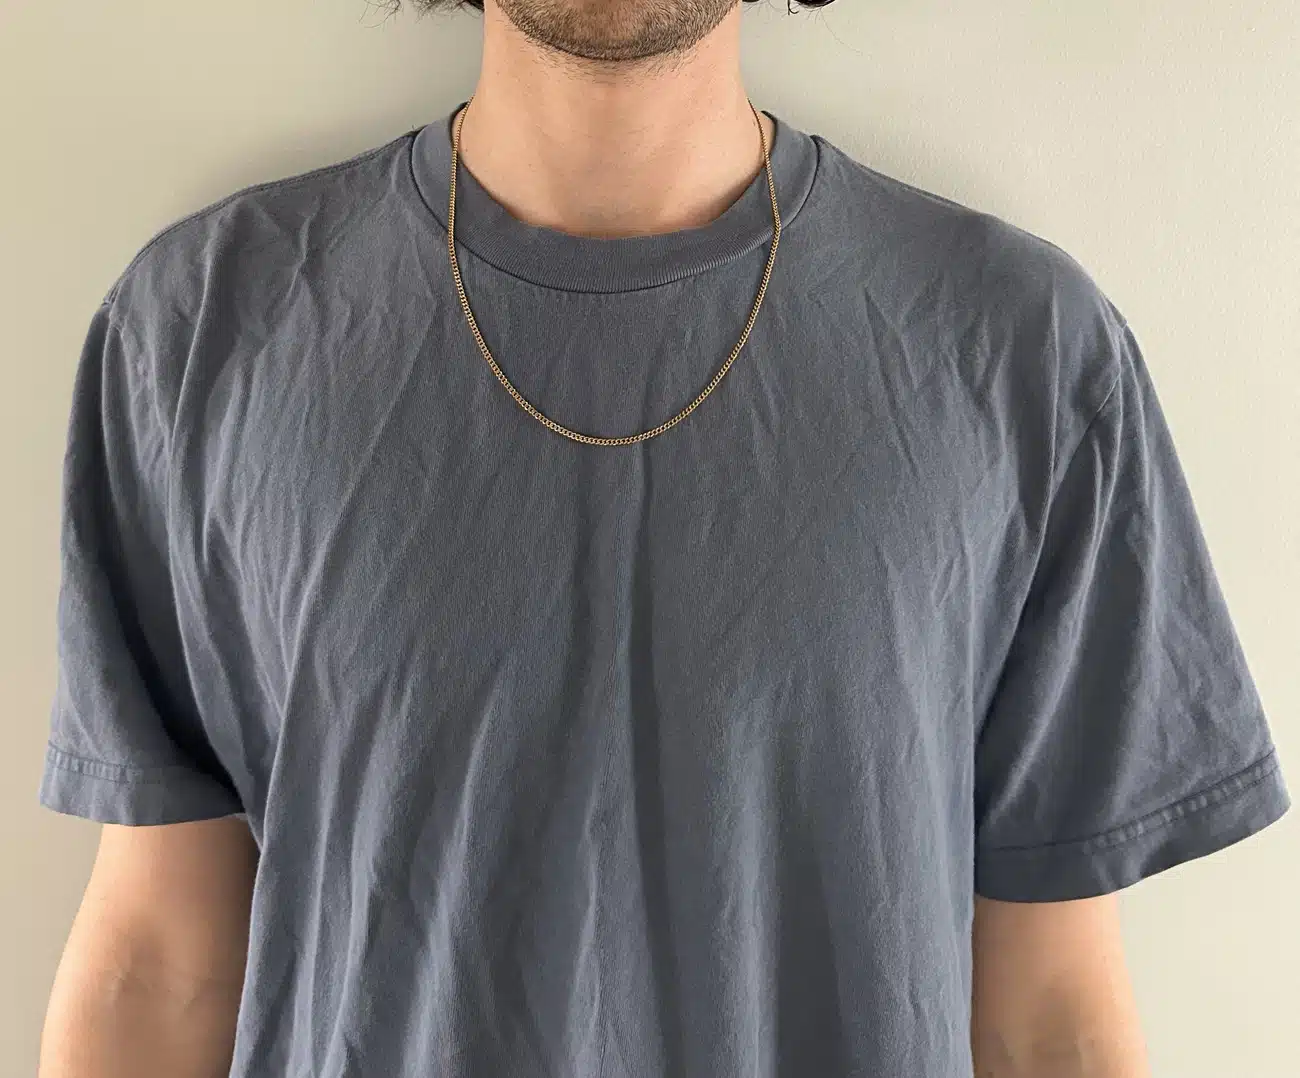 Does Wearing A Silver Chain Necklace Have Health Benefits? - Oliver Cabell